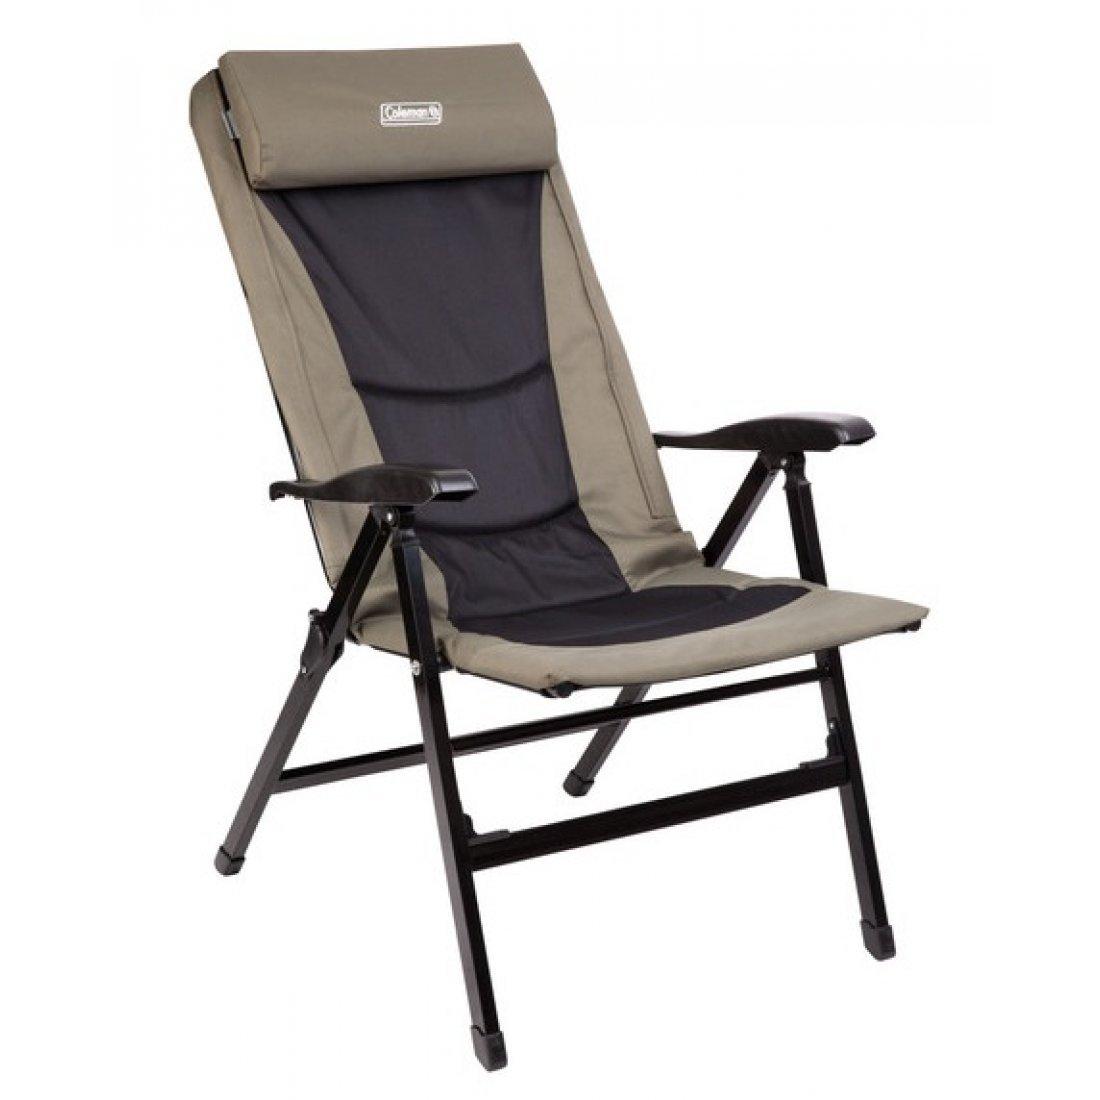 COLEMAN 8 POSITION CHAIR